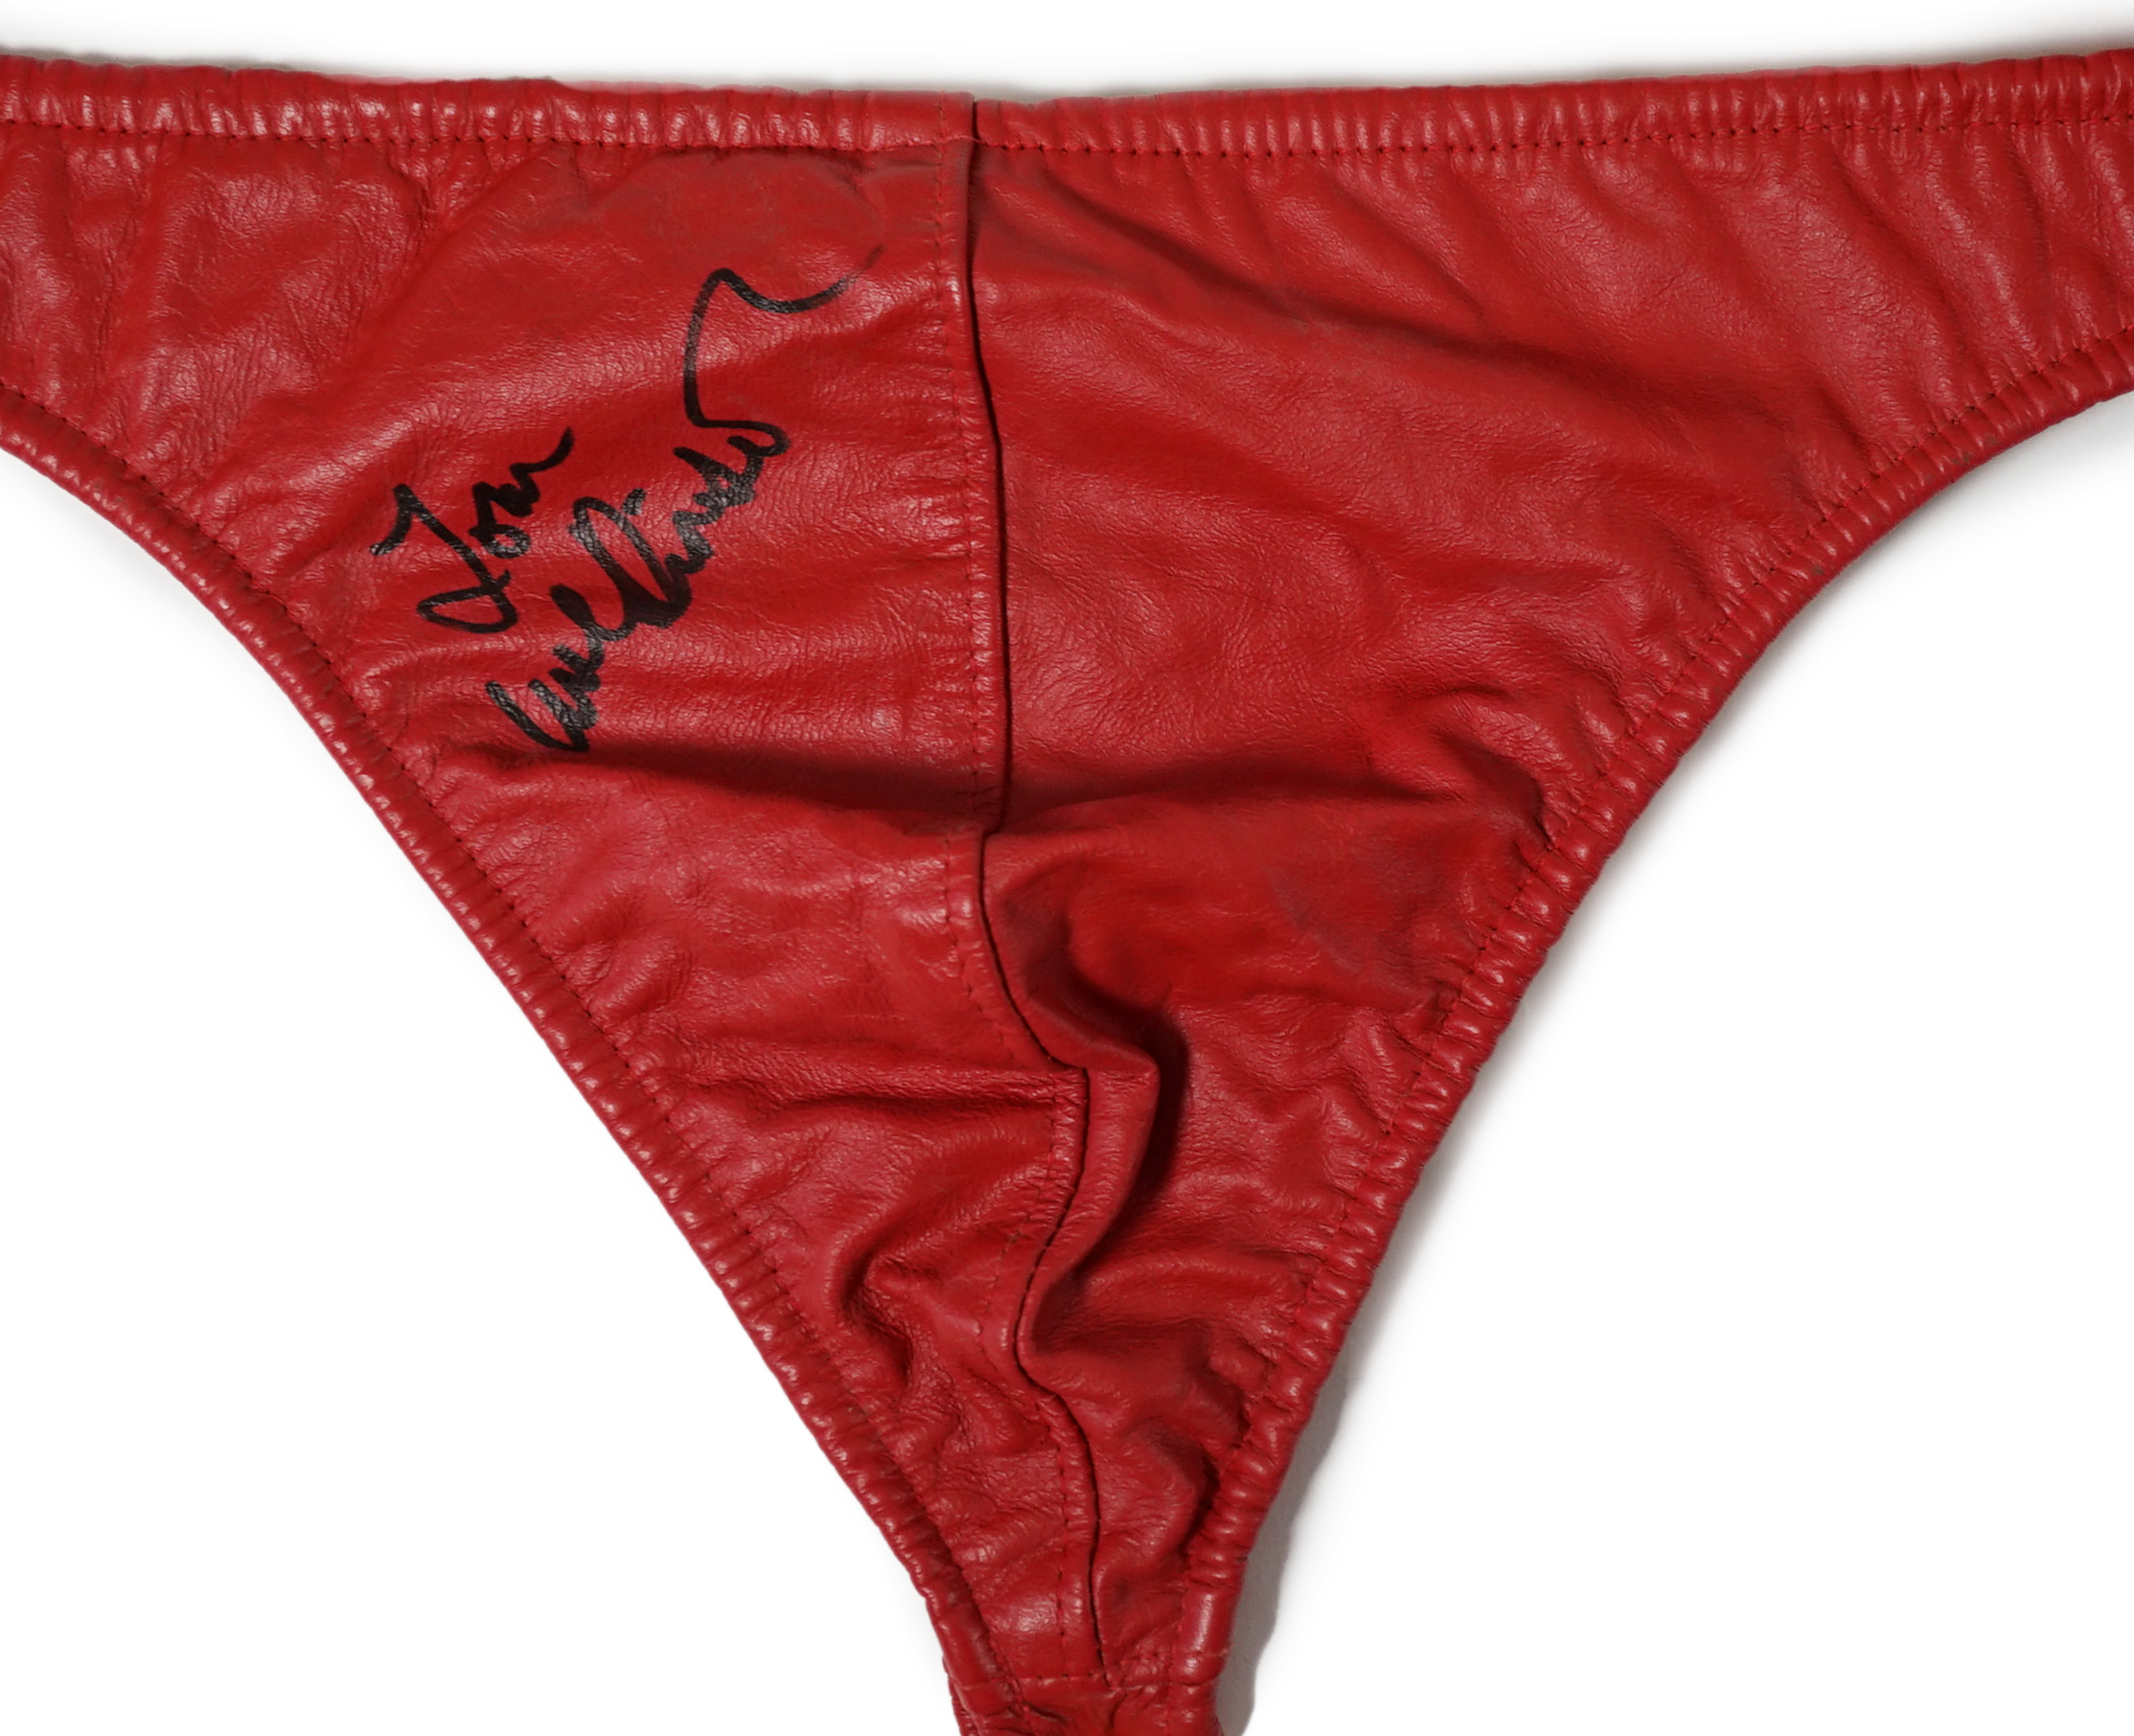 A red leather thong, as worn by Tom Wilkinson in the film The Full Monty and signed by him, together with a signed note confirming authenticity.